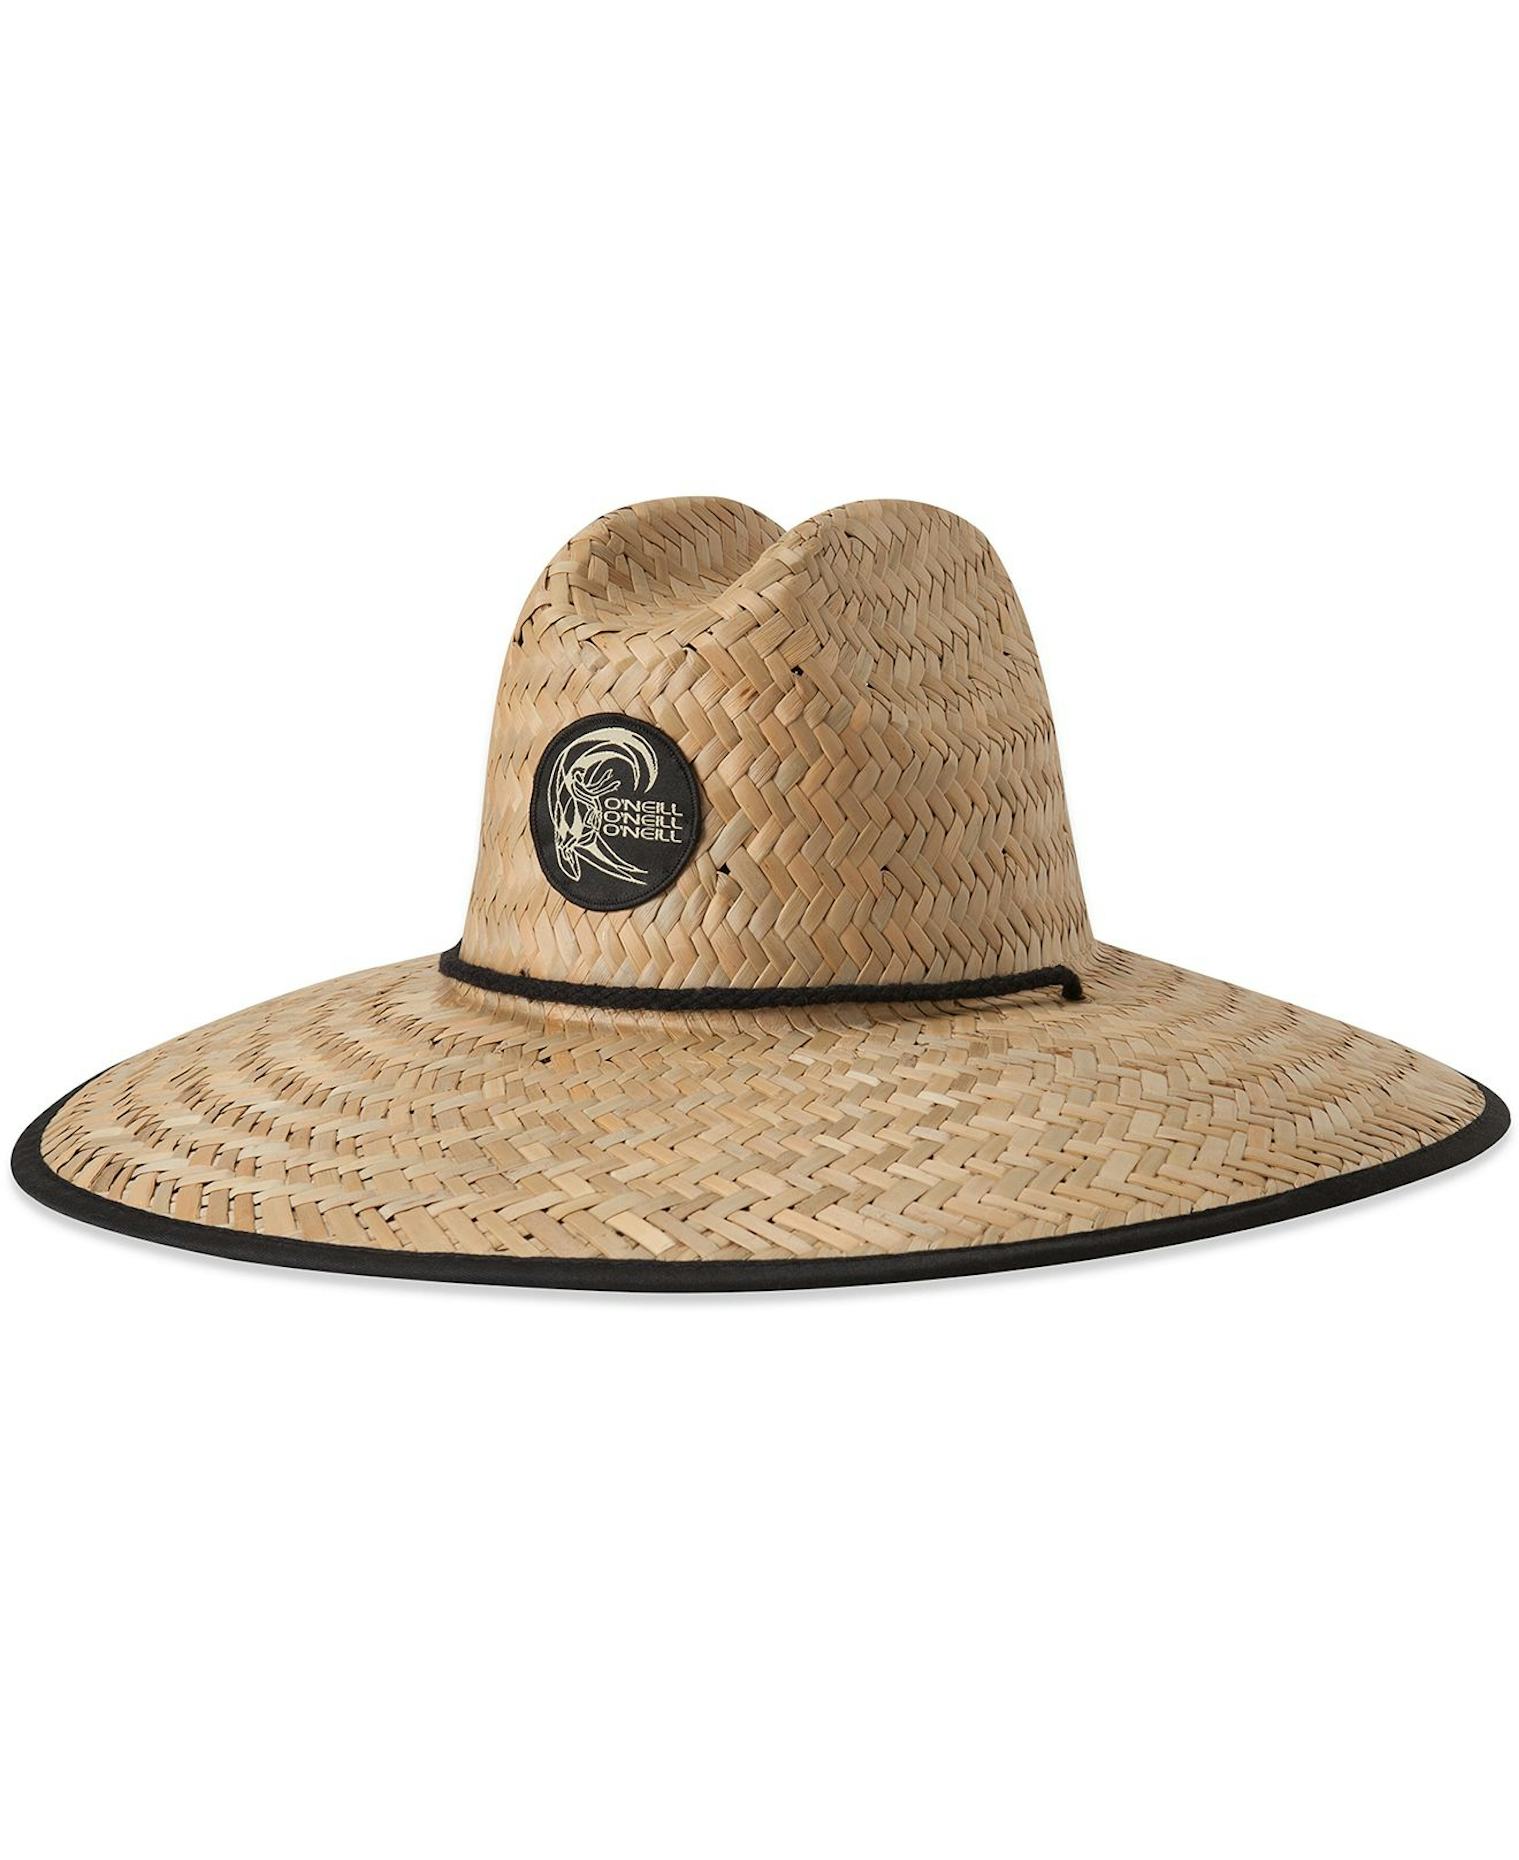 The Best Sun Hats For Summer